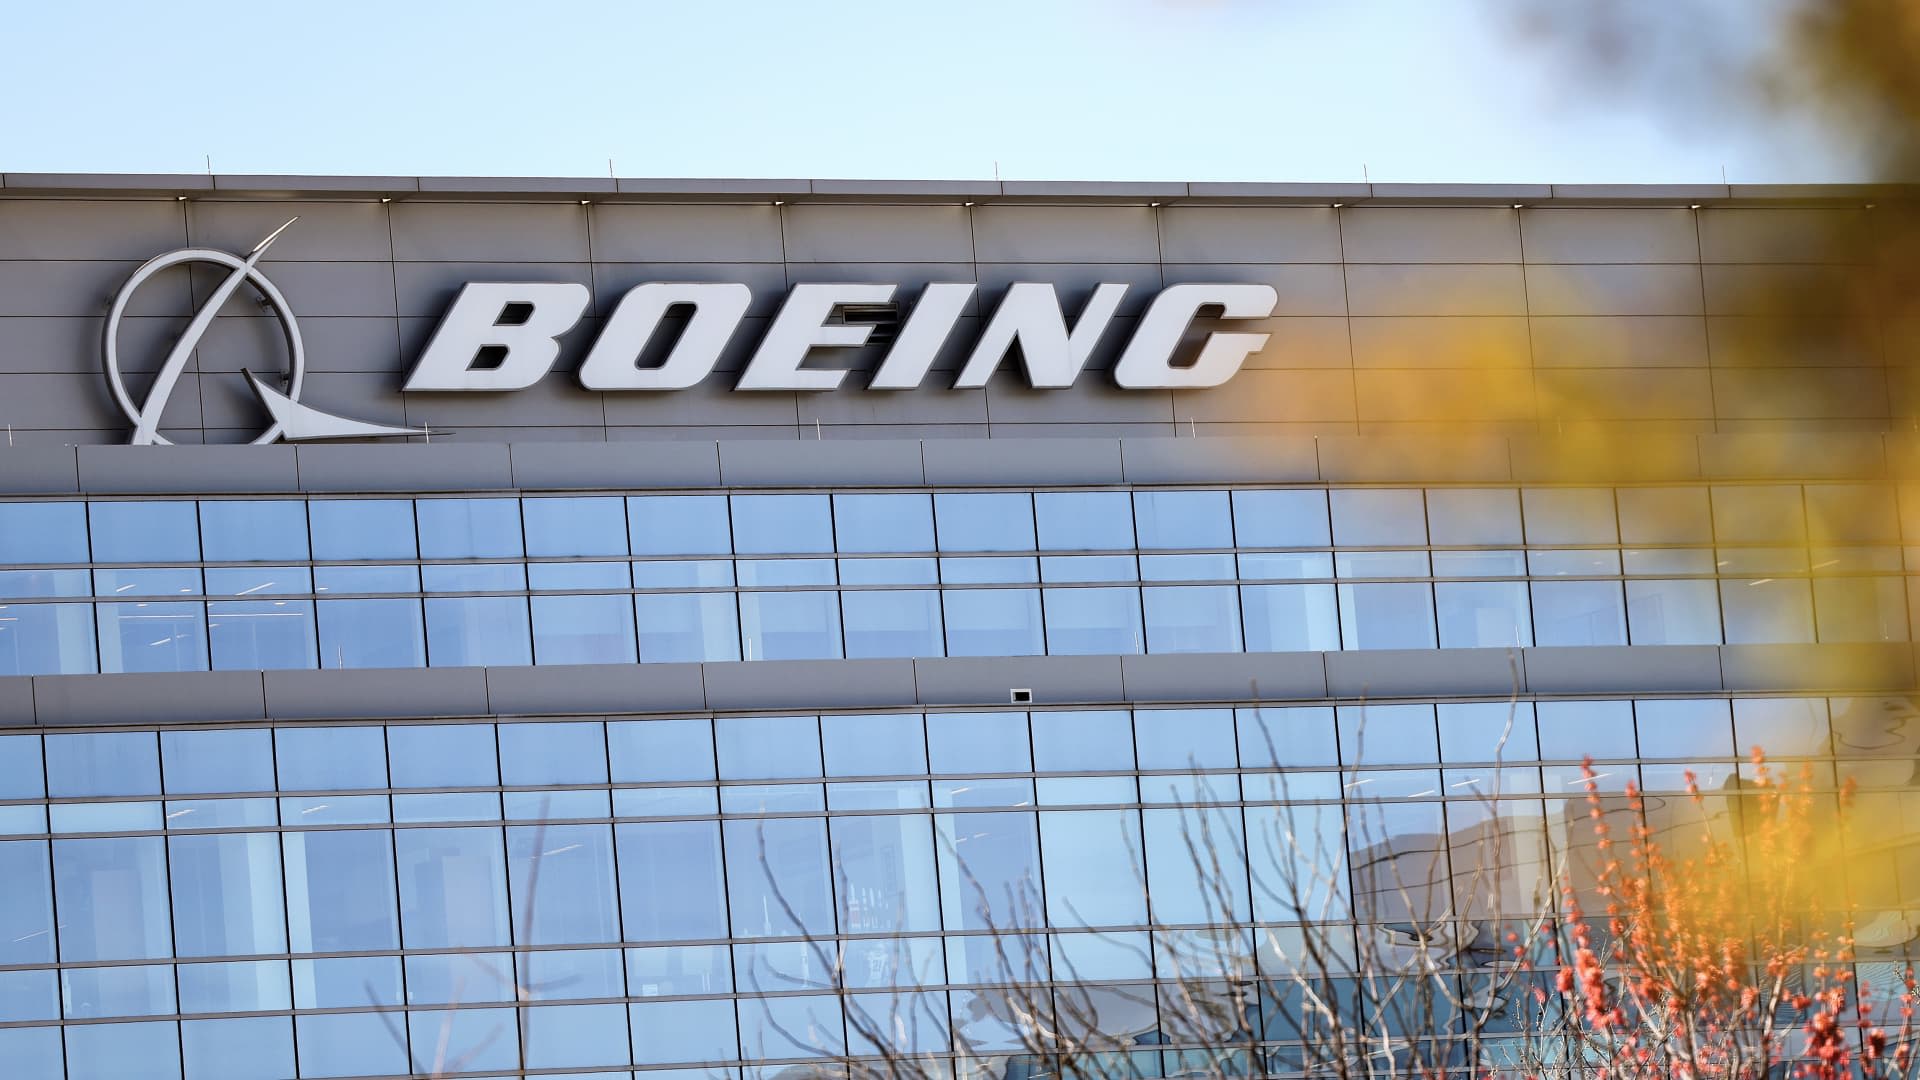 Boeing, firefighters union reach tentative contract deal